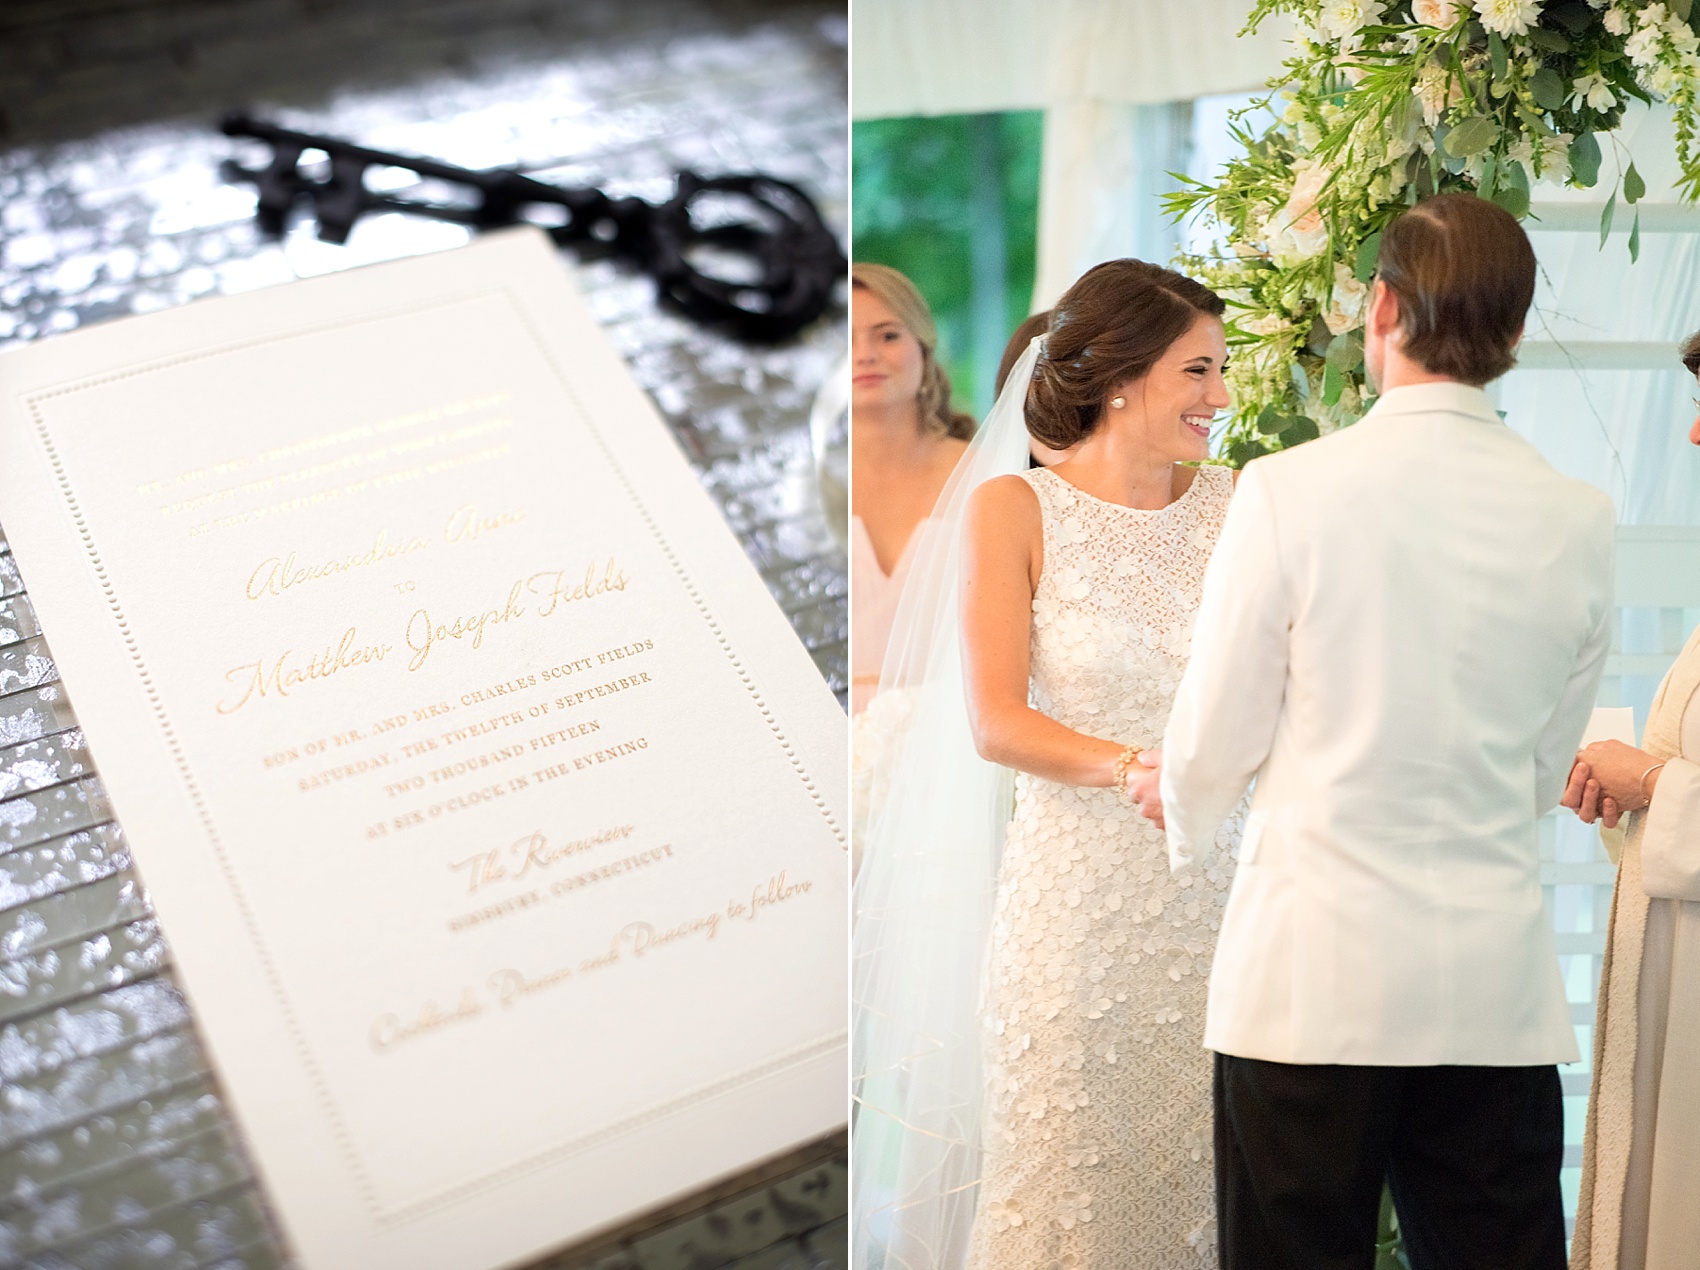 Wedding invitation suite in classic script and ecru. Photo by Mikkel Paige Photography.